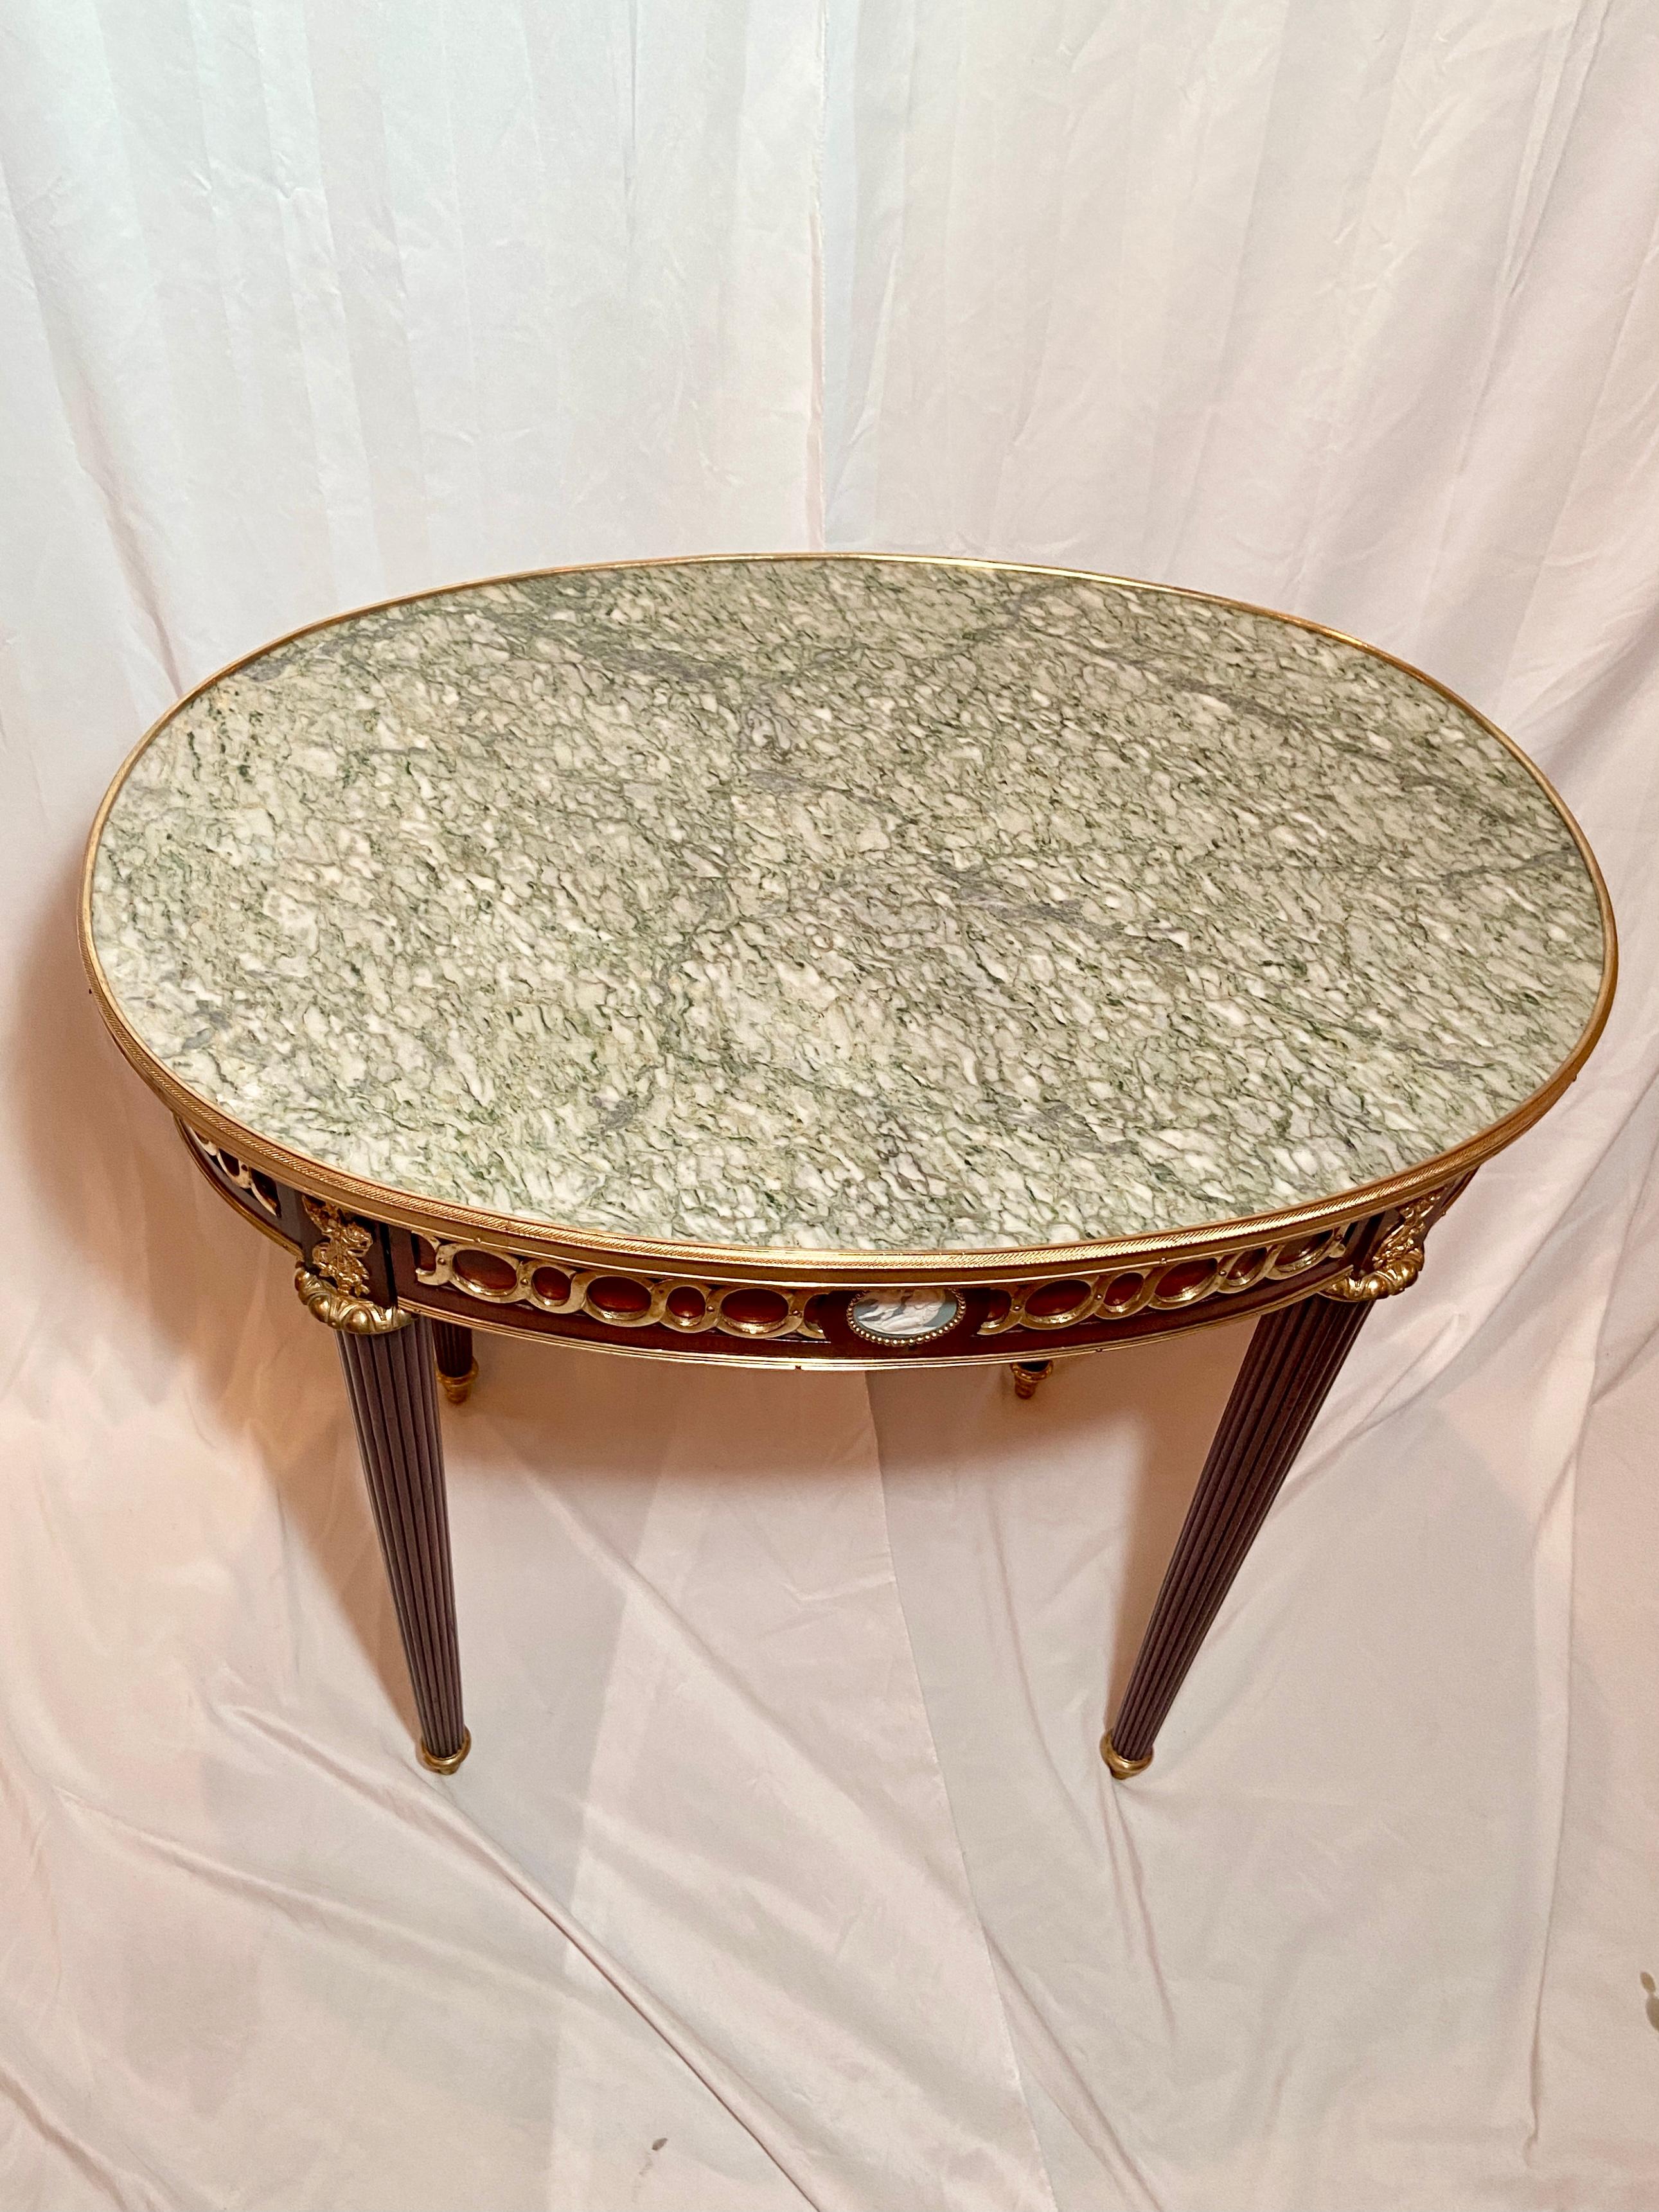 Antique French gold bronze mounted mahogany occasional table with marble top and wedgwood plaque, Circa 1880.